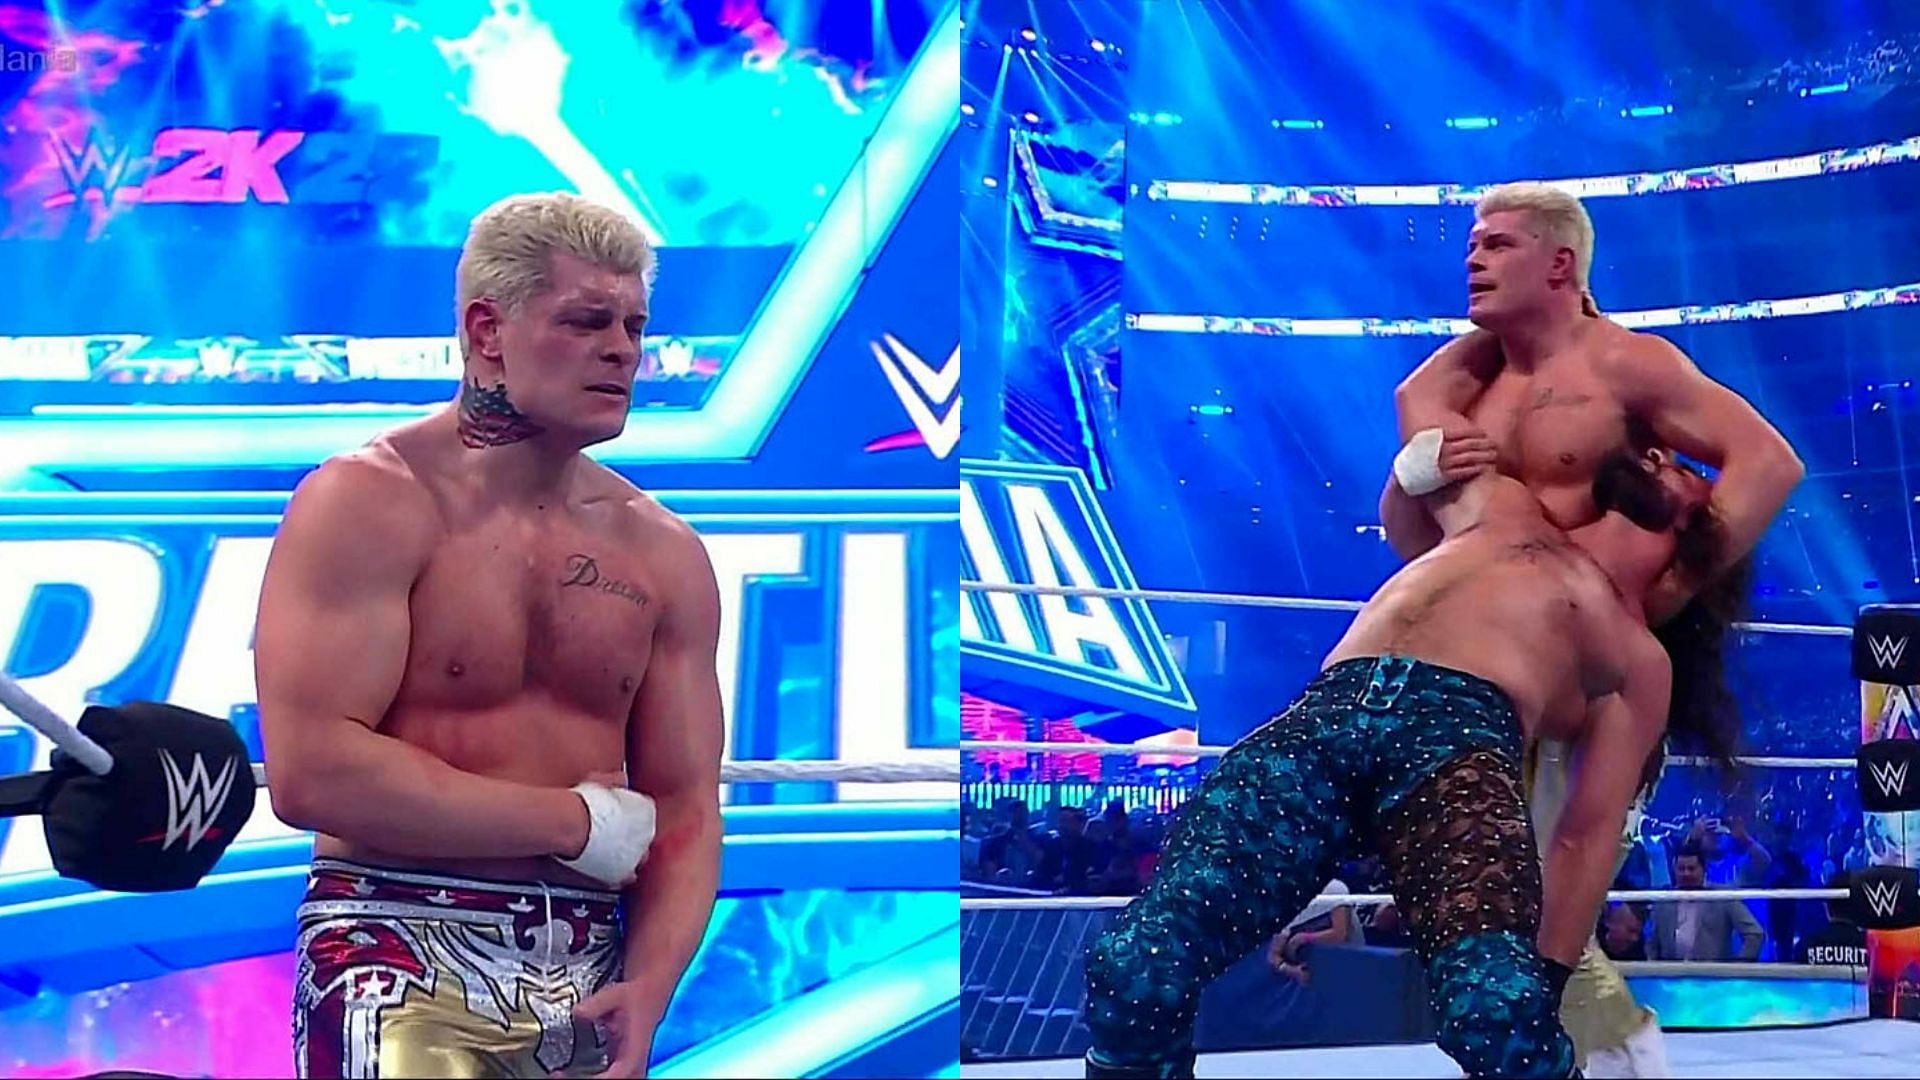 Cody Rhodes returned to WWE at WrestleMania 38